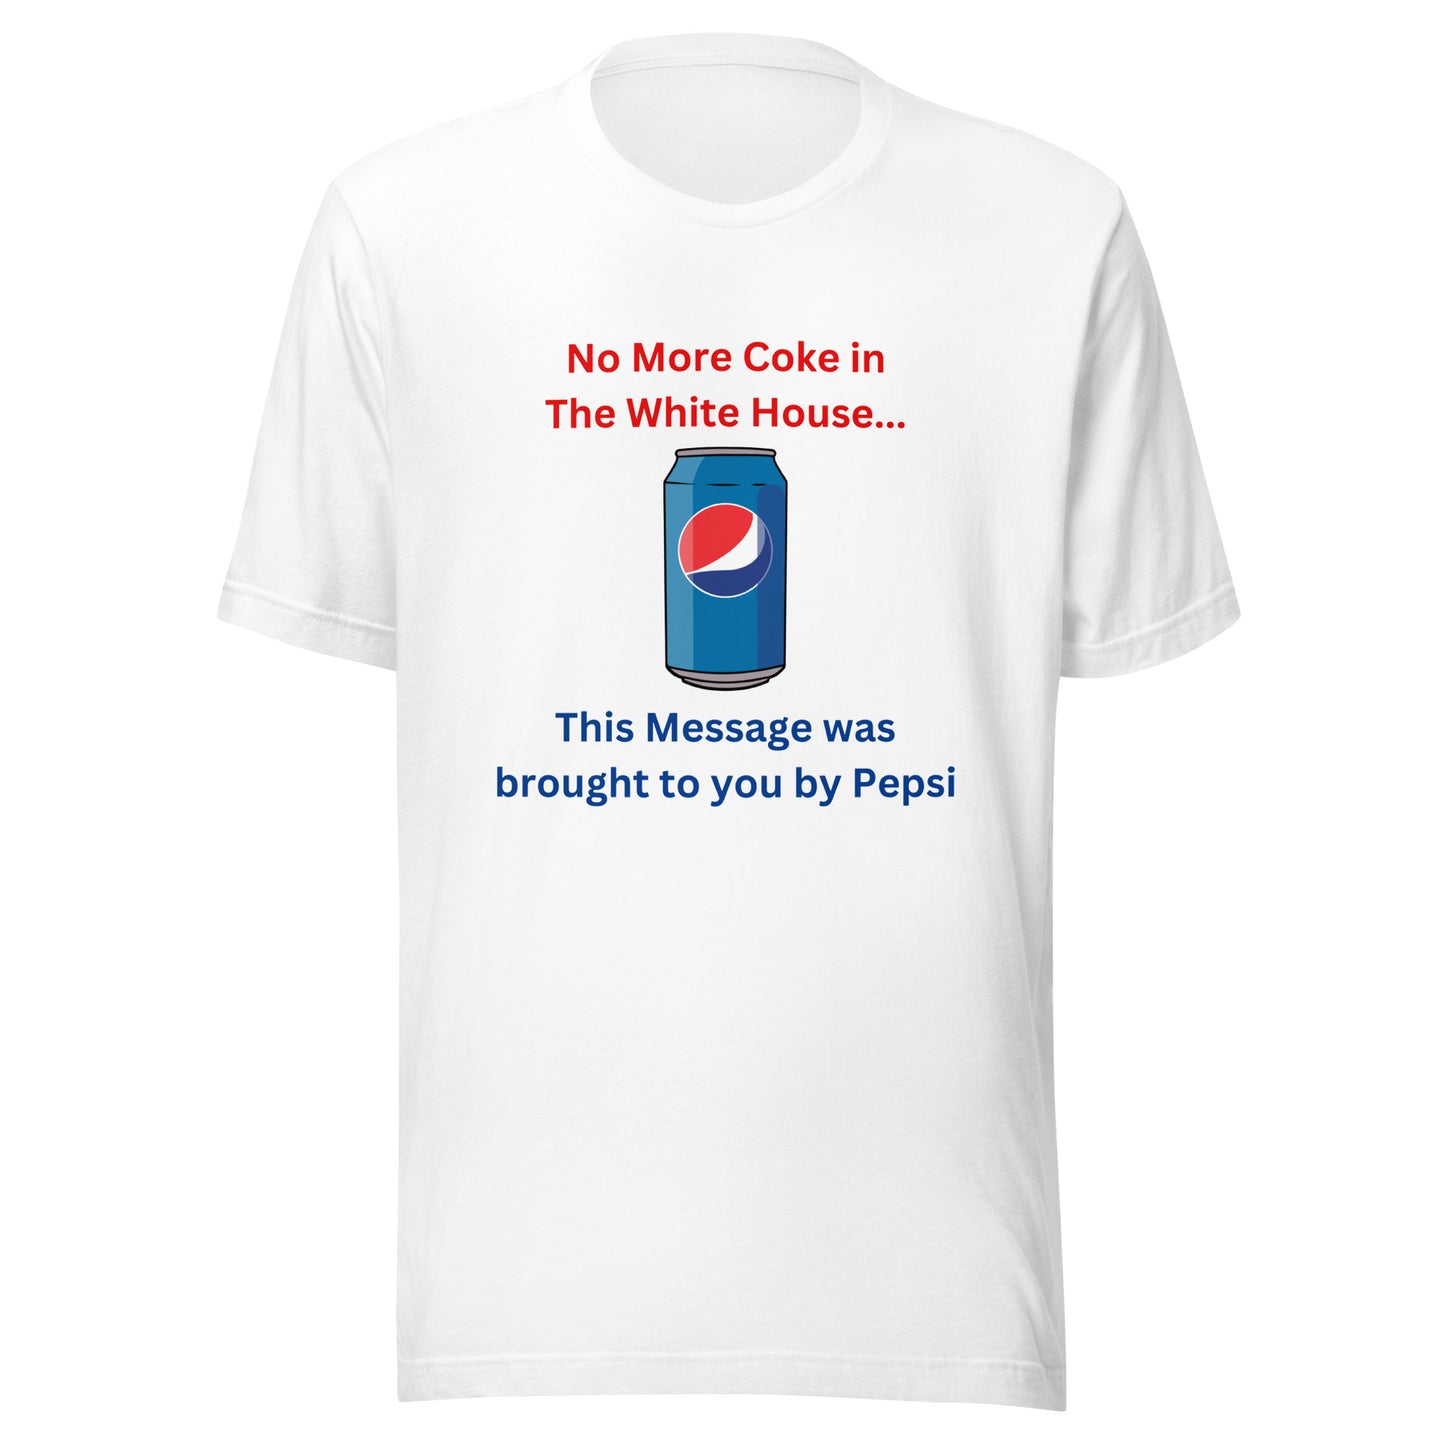 Coke in The White House t-shirt